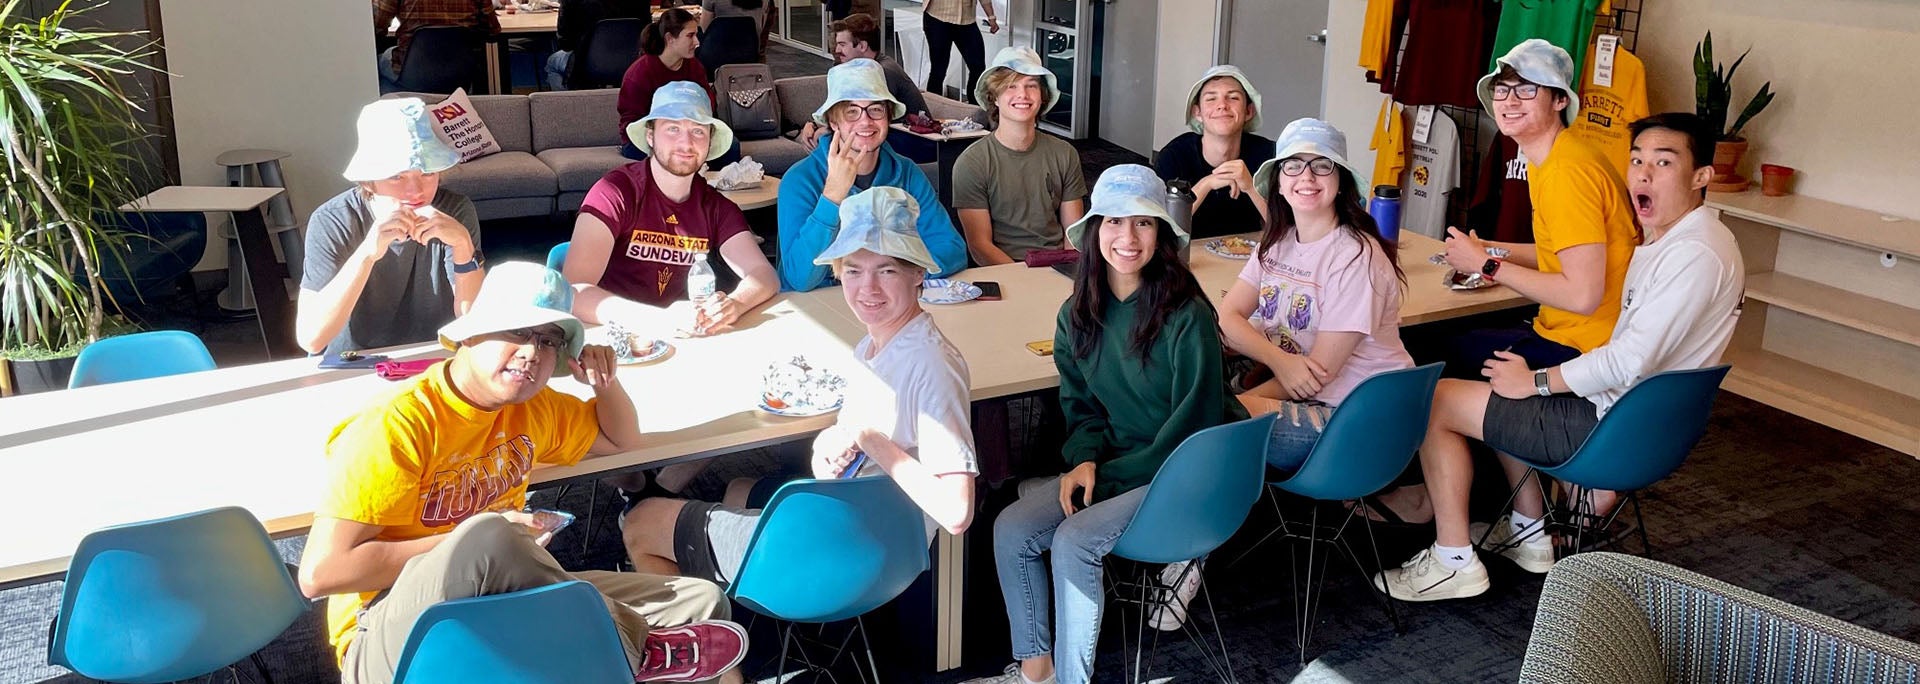 Many students gathered around the Barrett Poly suite wearing identical hats and smiling